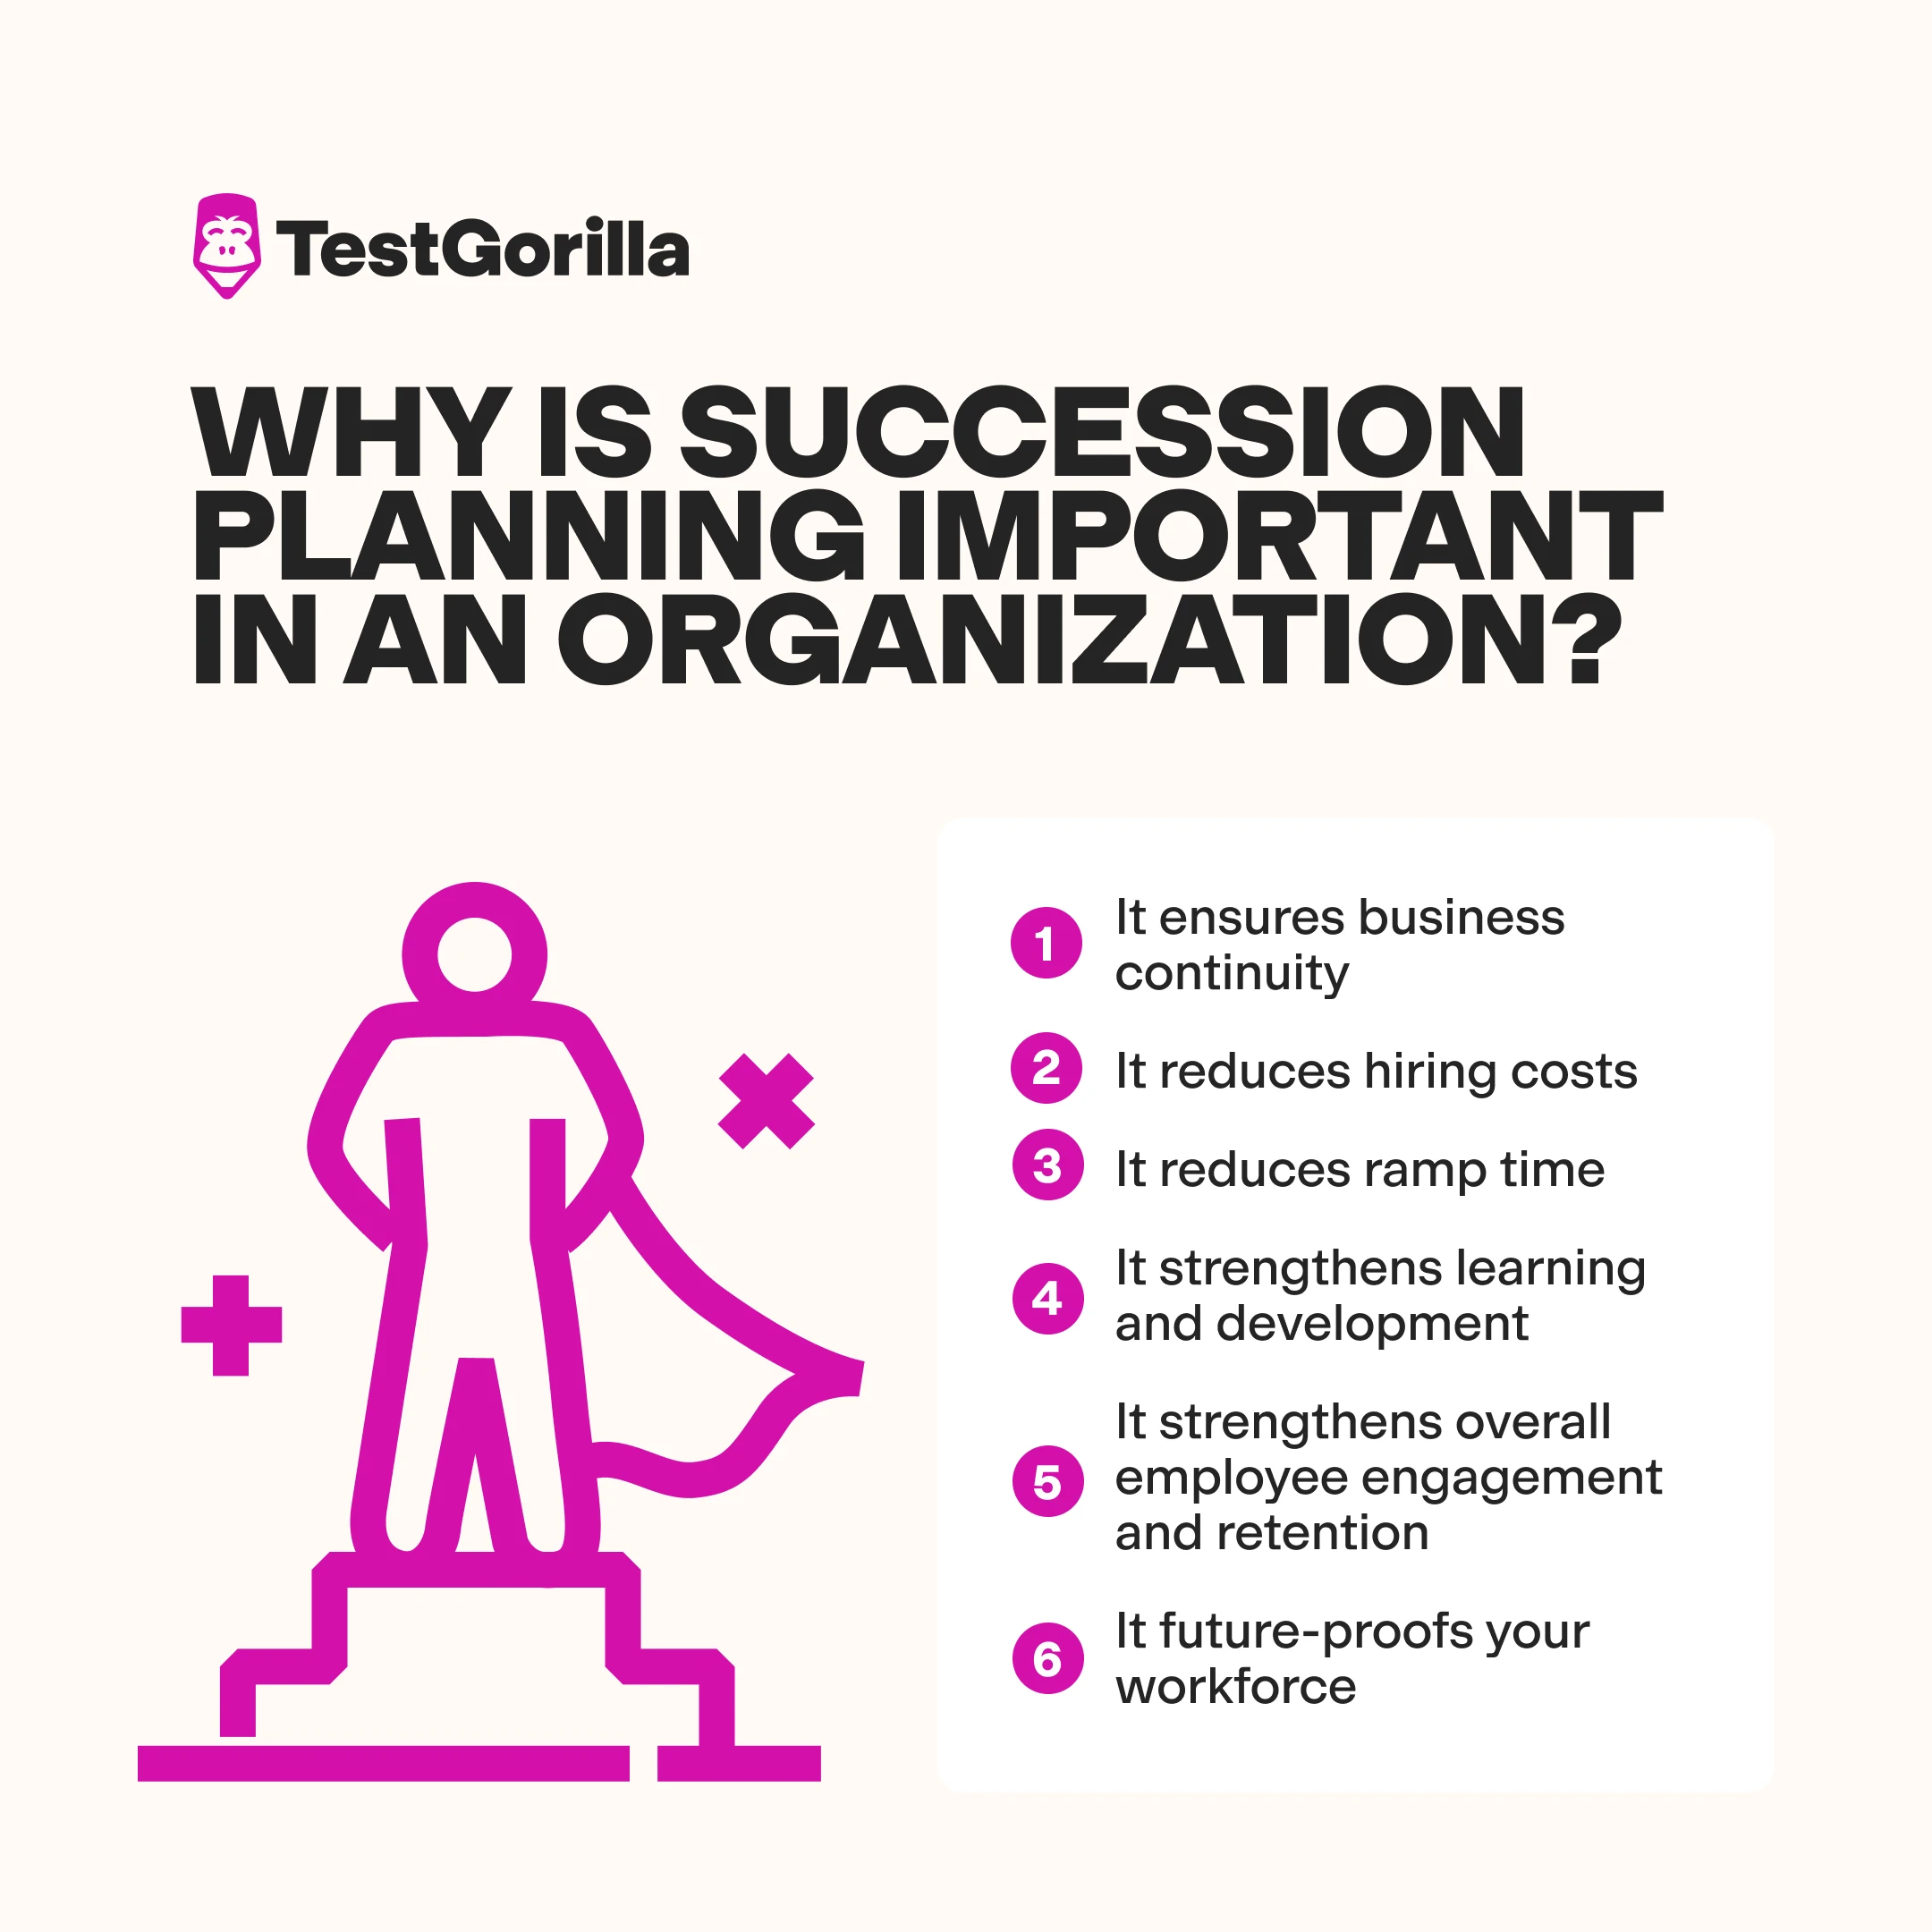 Why is succession planning important in an organization graphic